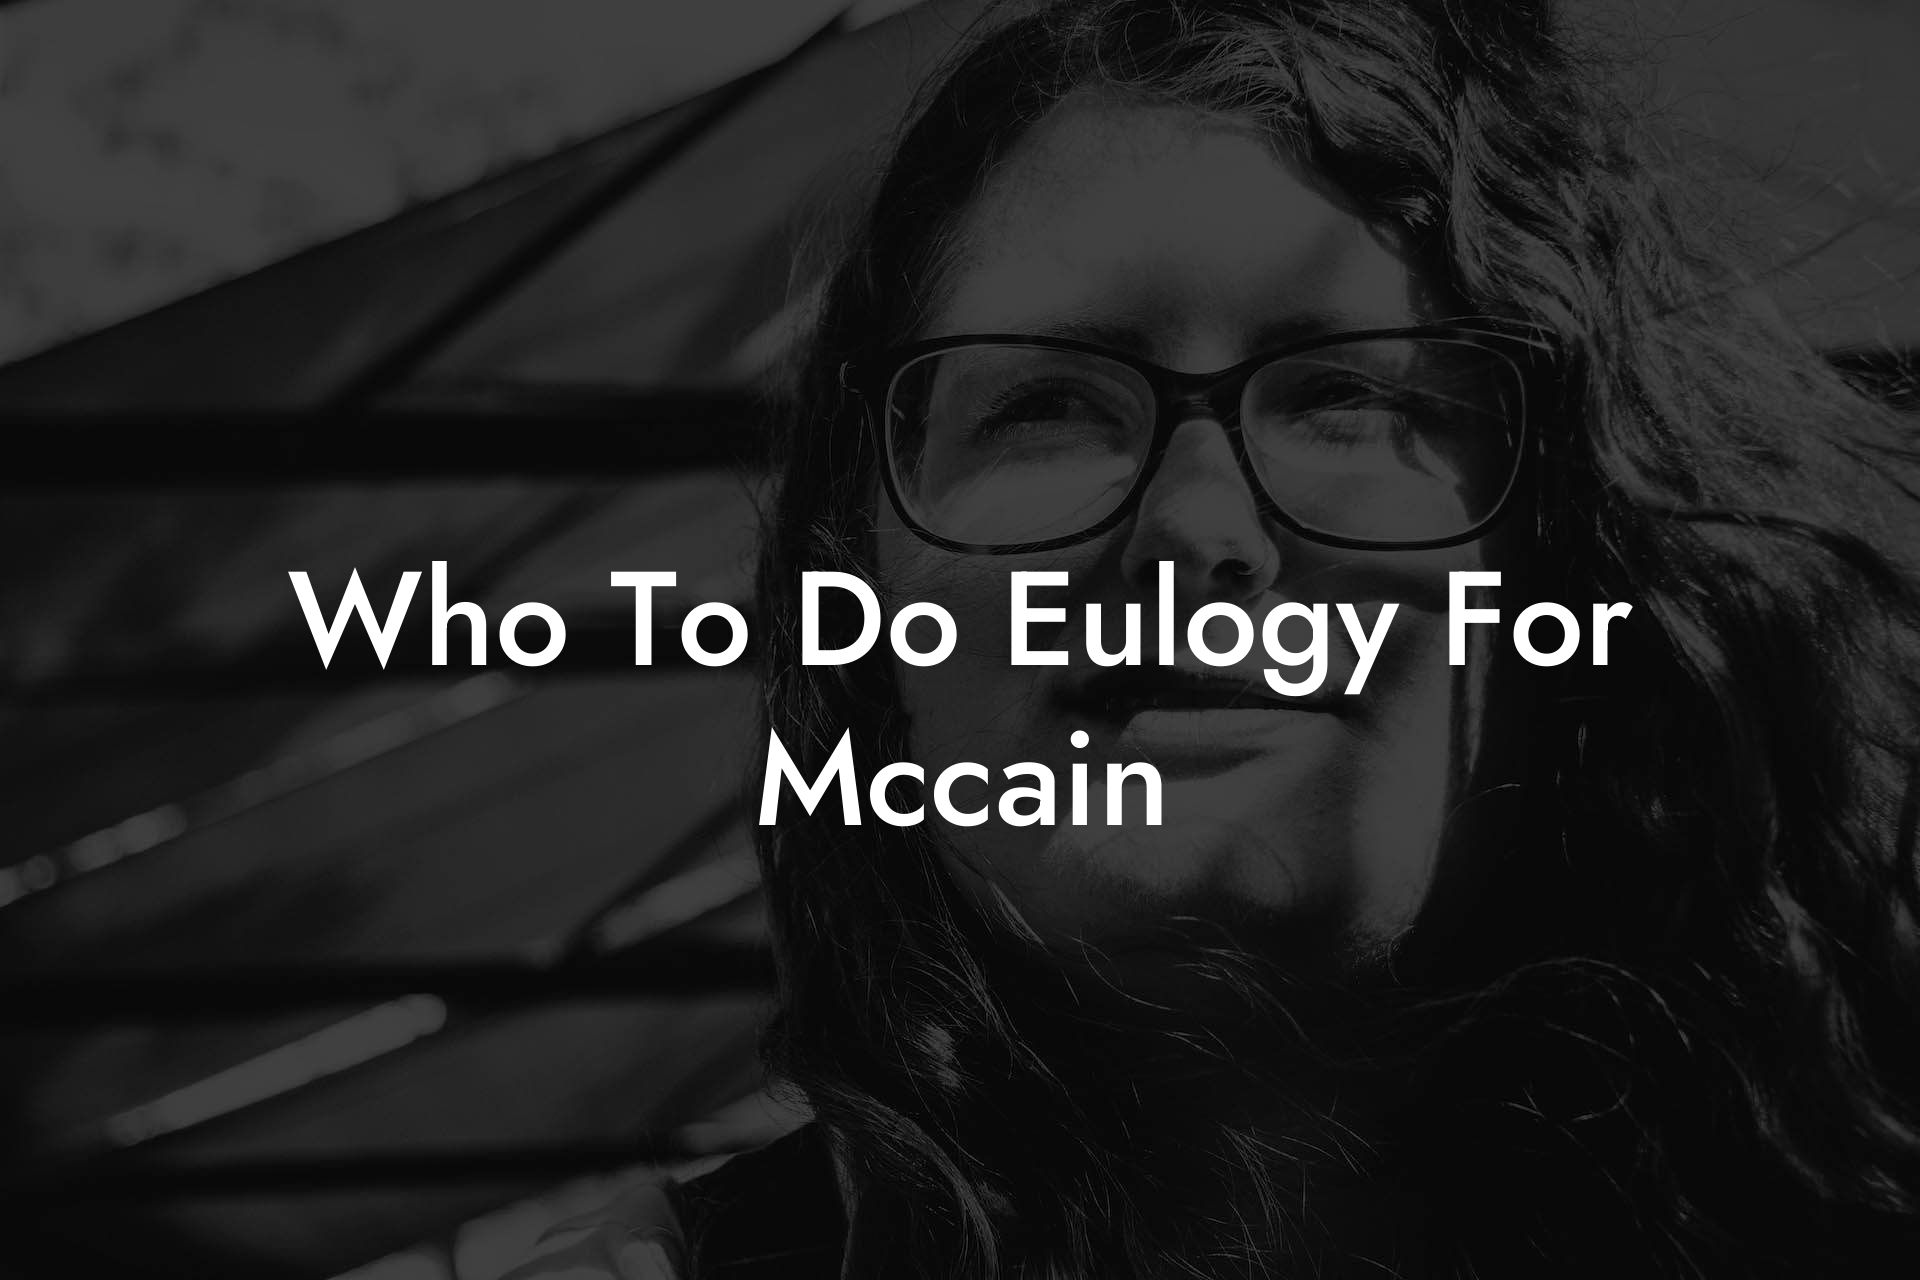 Who To Do Eulogy For Mccain